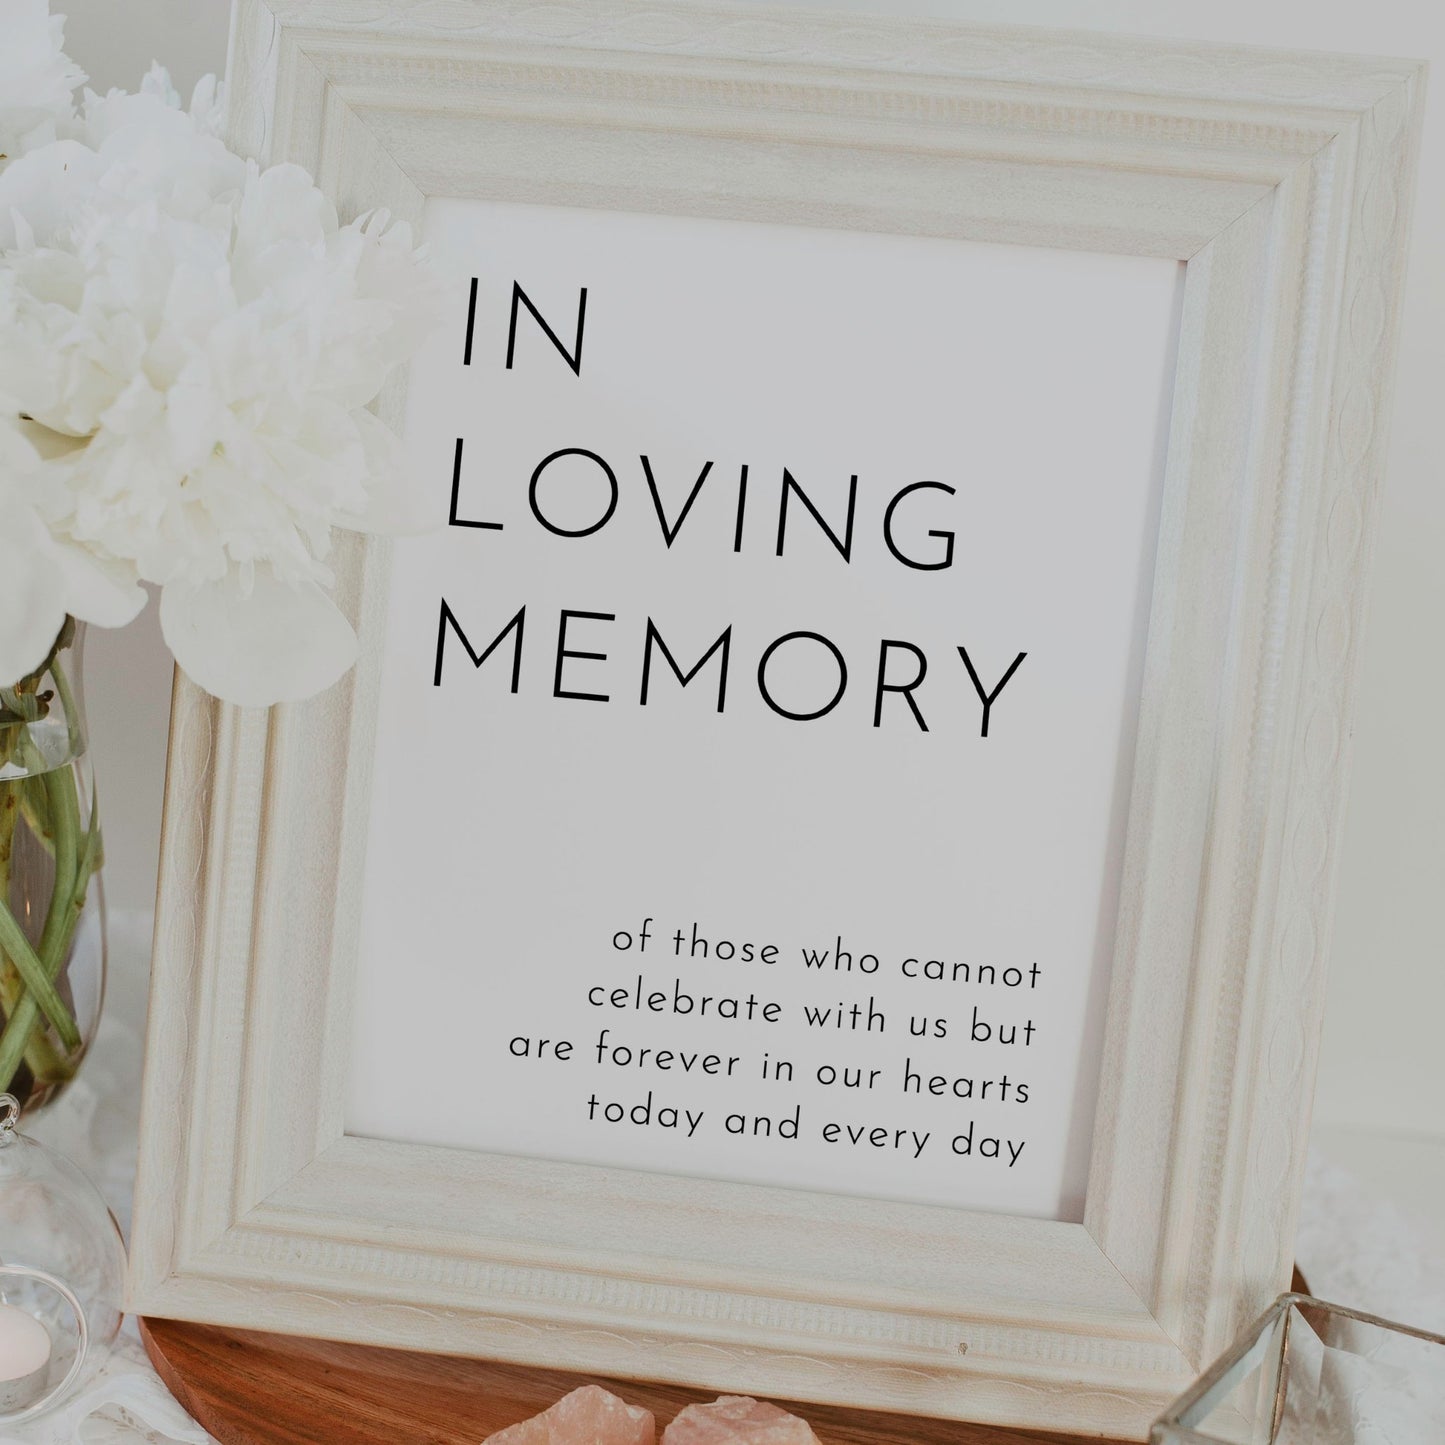 Memorial Tribute Sign - In Loving Memory for Wedding Reception and Special Events - SincerelyByNicole